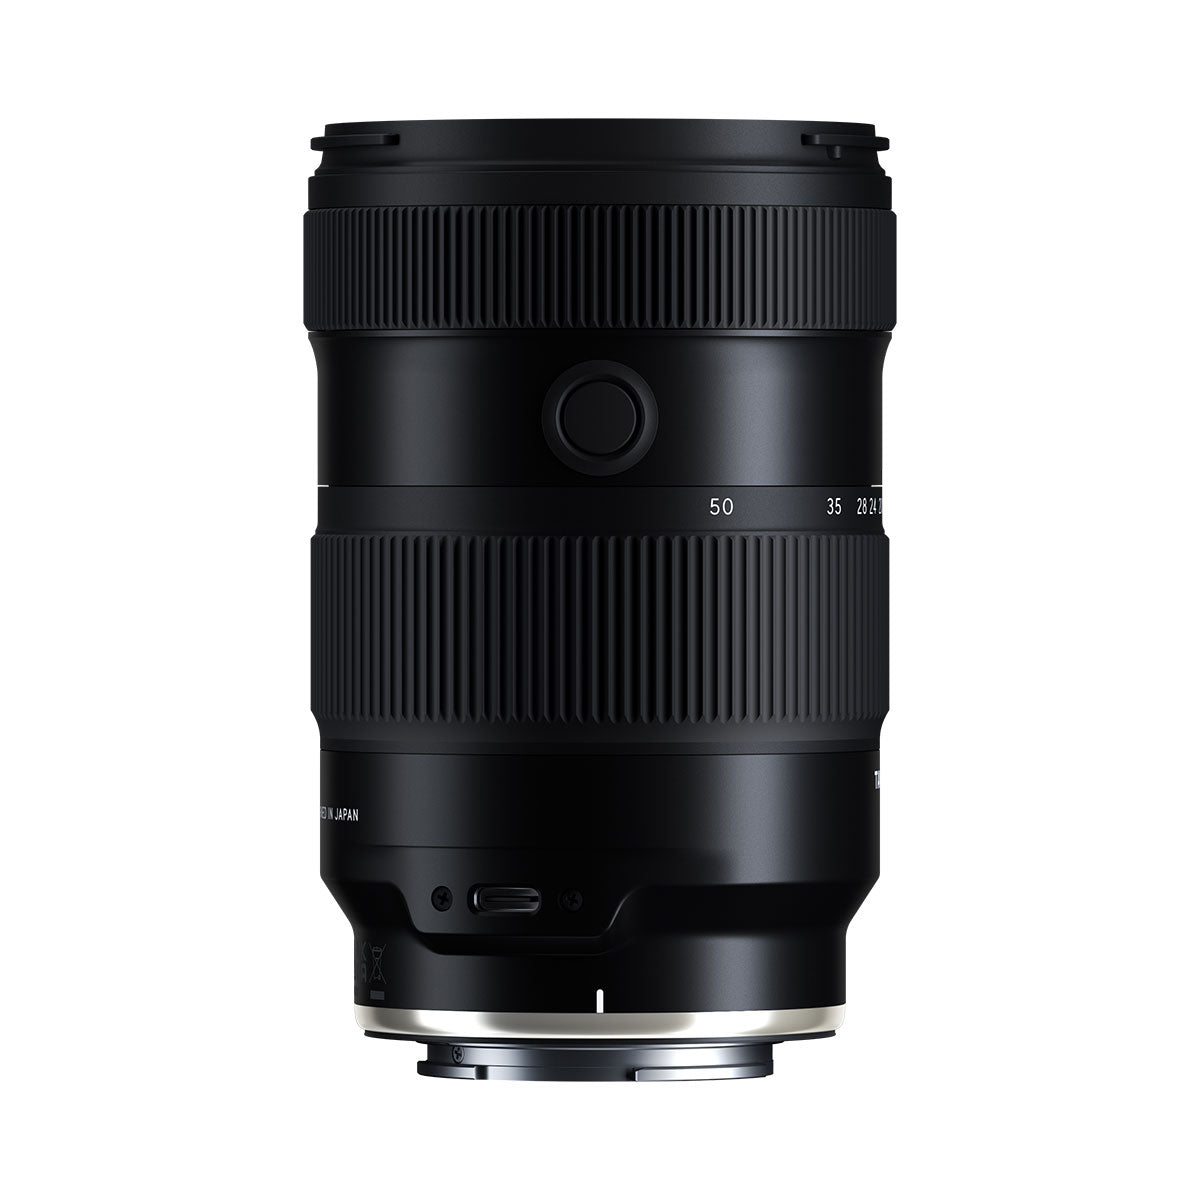 Tamron 17-50mm f/4 Di III VXD Lens for Sony FE